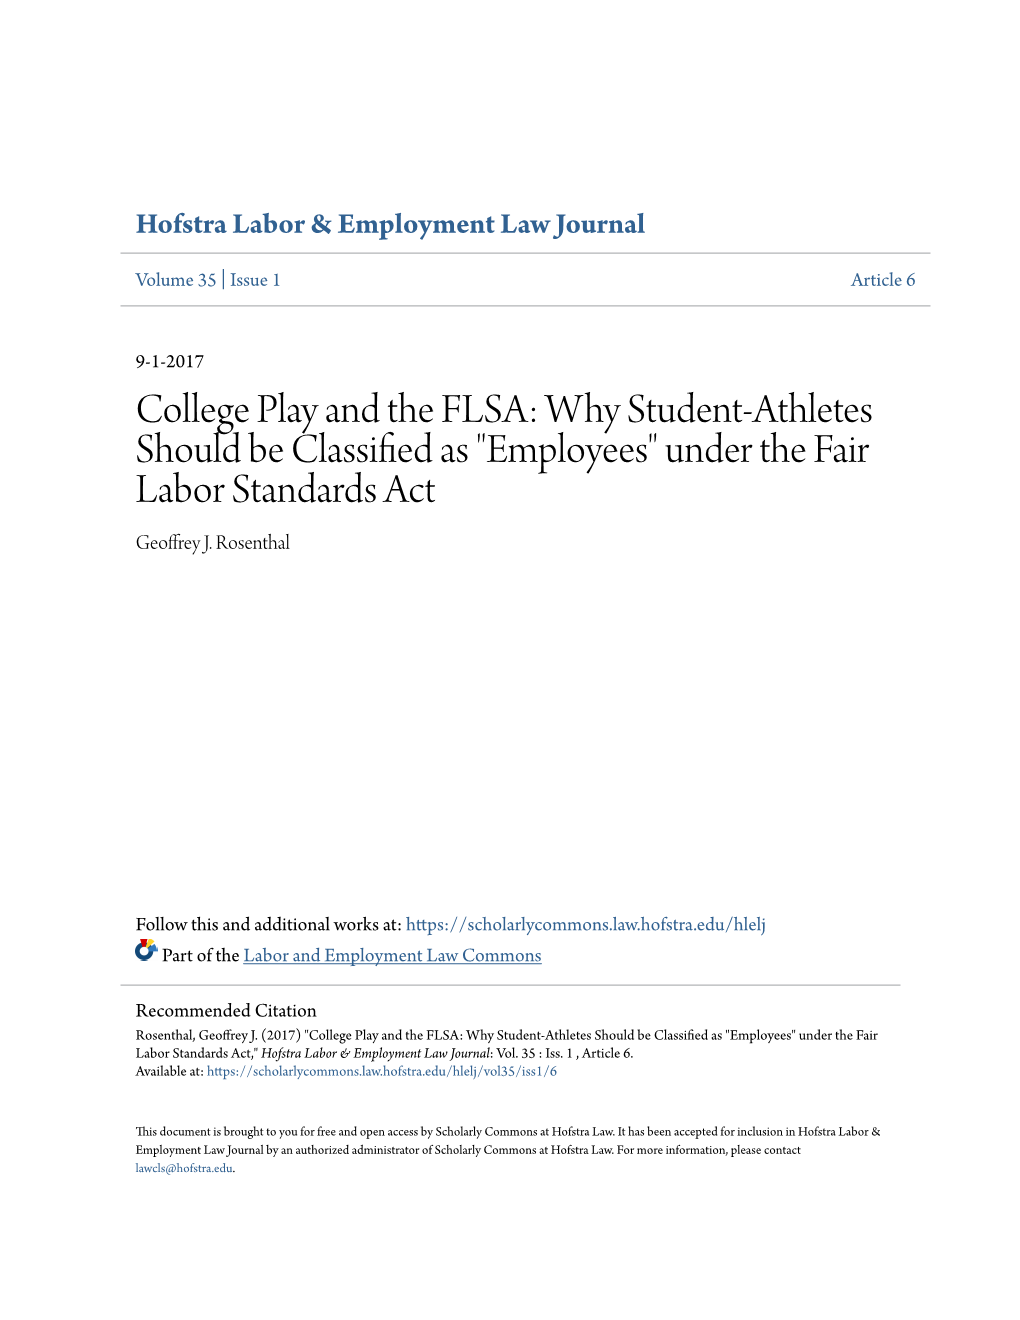 Why Student-Athletes Should Be Classified As "Employees" Under the Fair Labor Standards Act," Hofstra Labor & Employment Law Journal: Vol